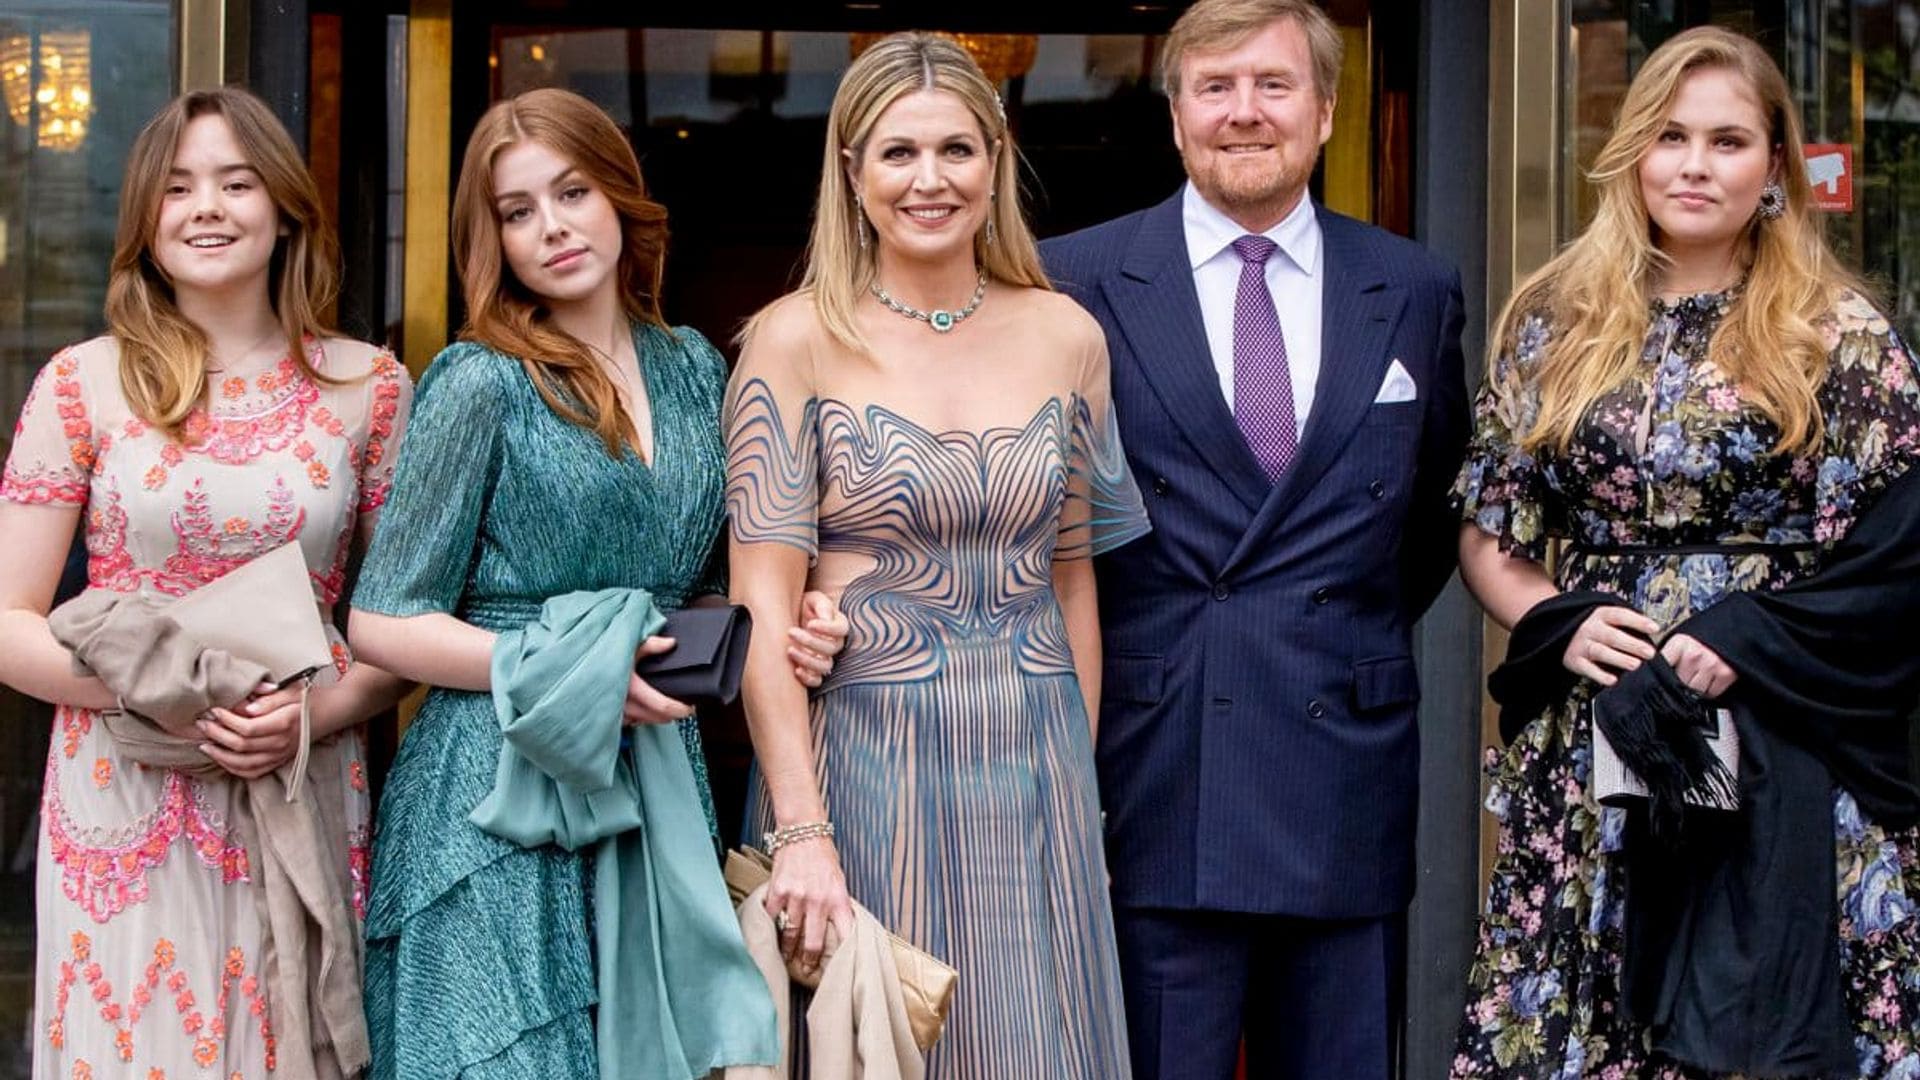 Dutch Princesses look all grown up at concert for mom Queen Maxima's 50th birthday